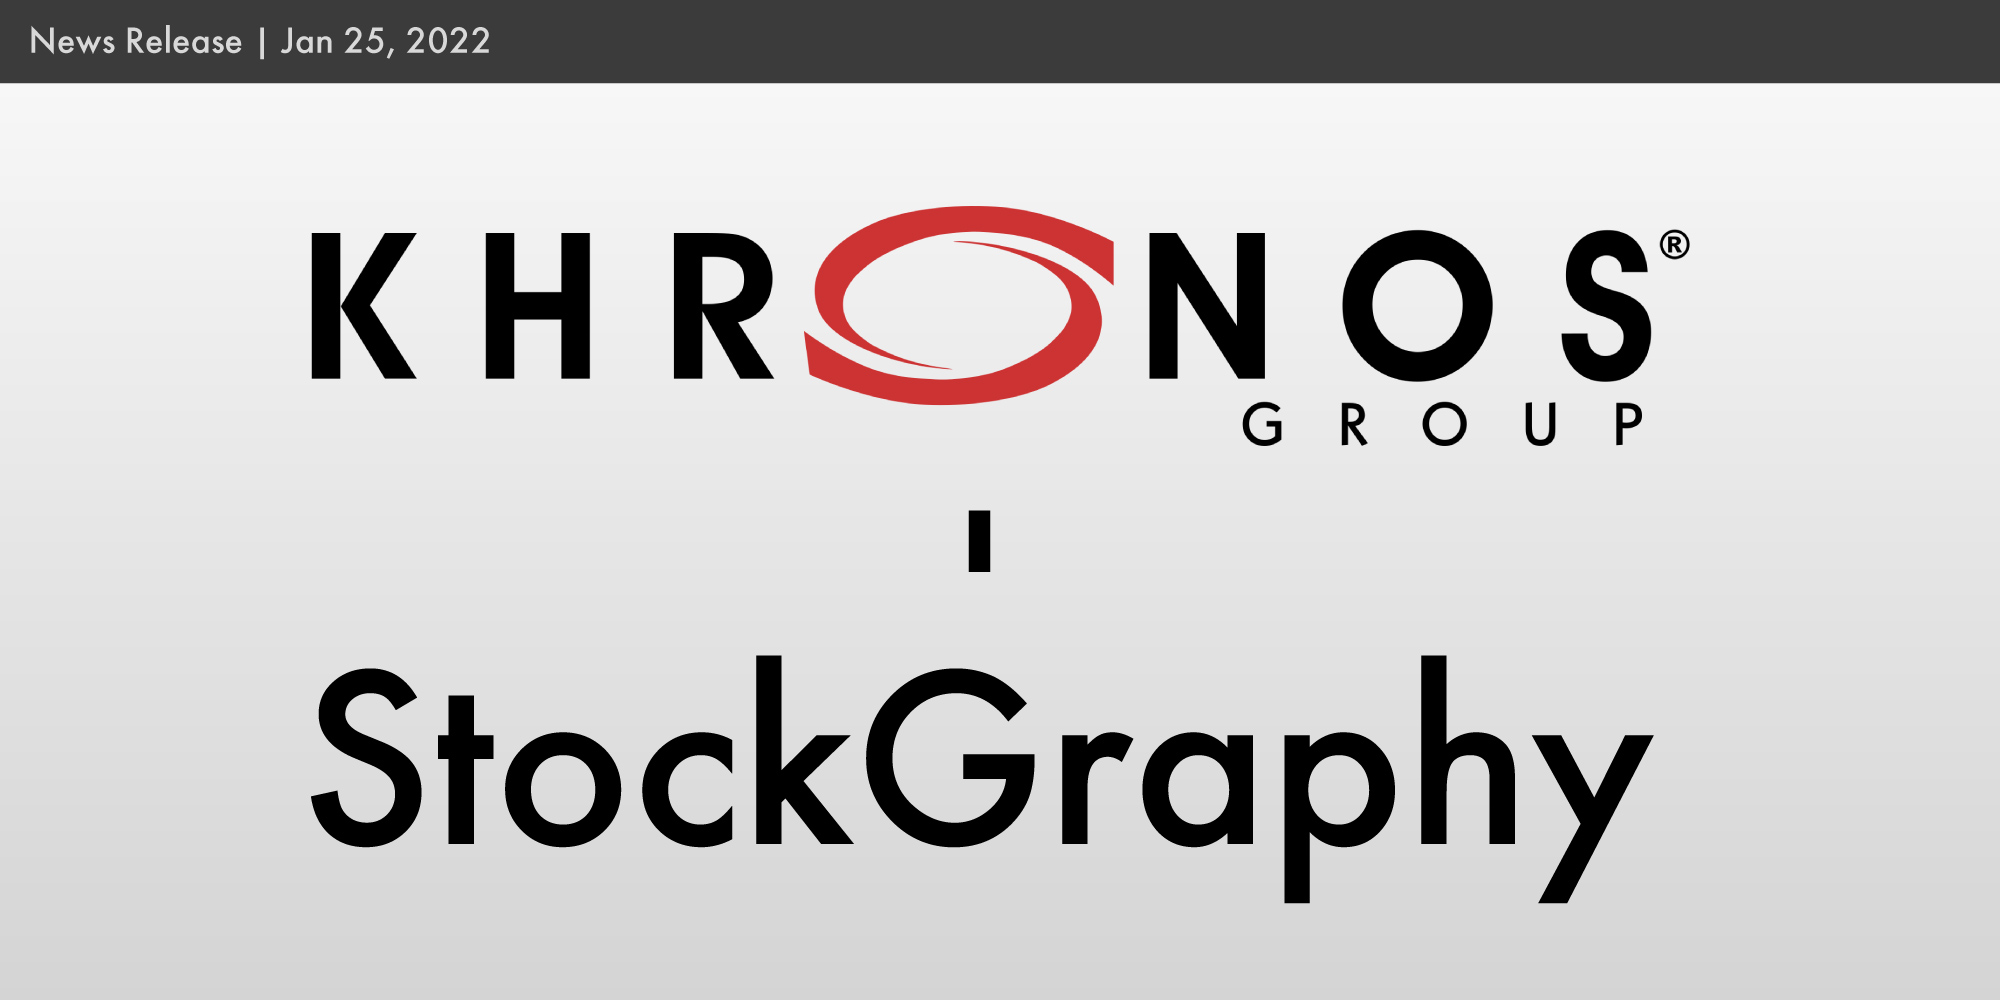 StockGraphy joined the Khronos Group, the consortium of standards for 3D-related technologies.